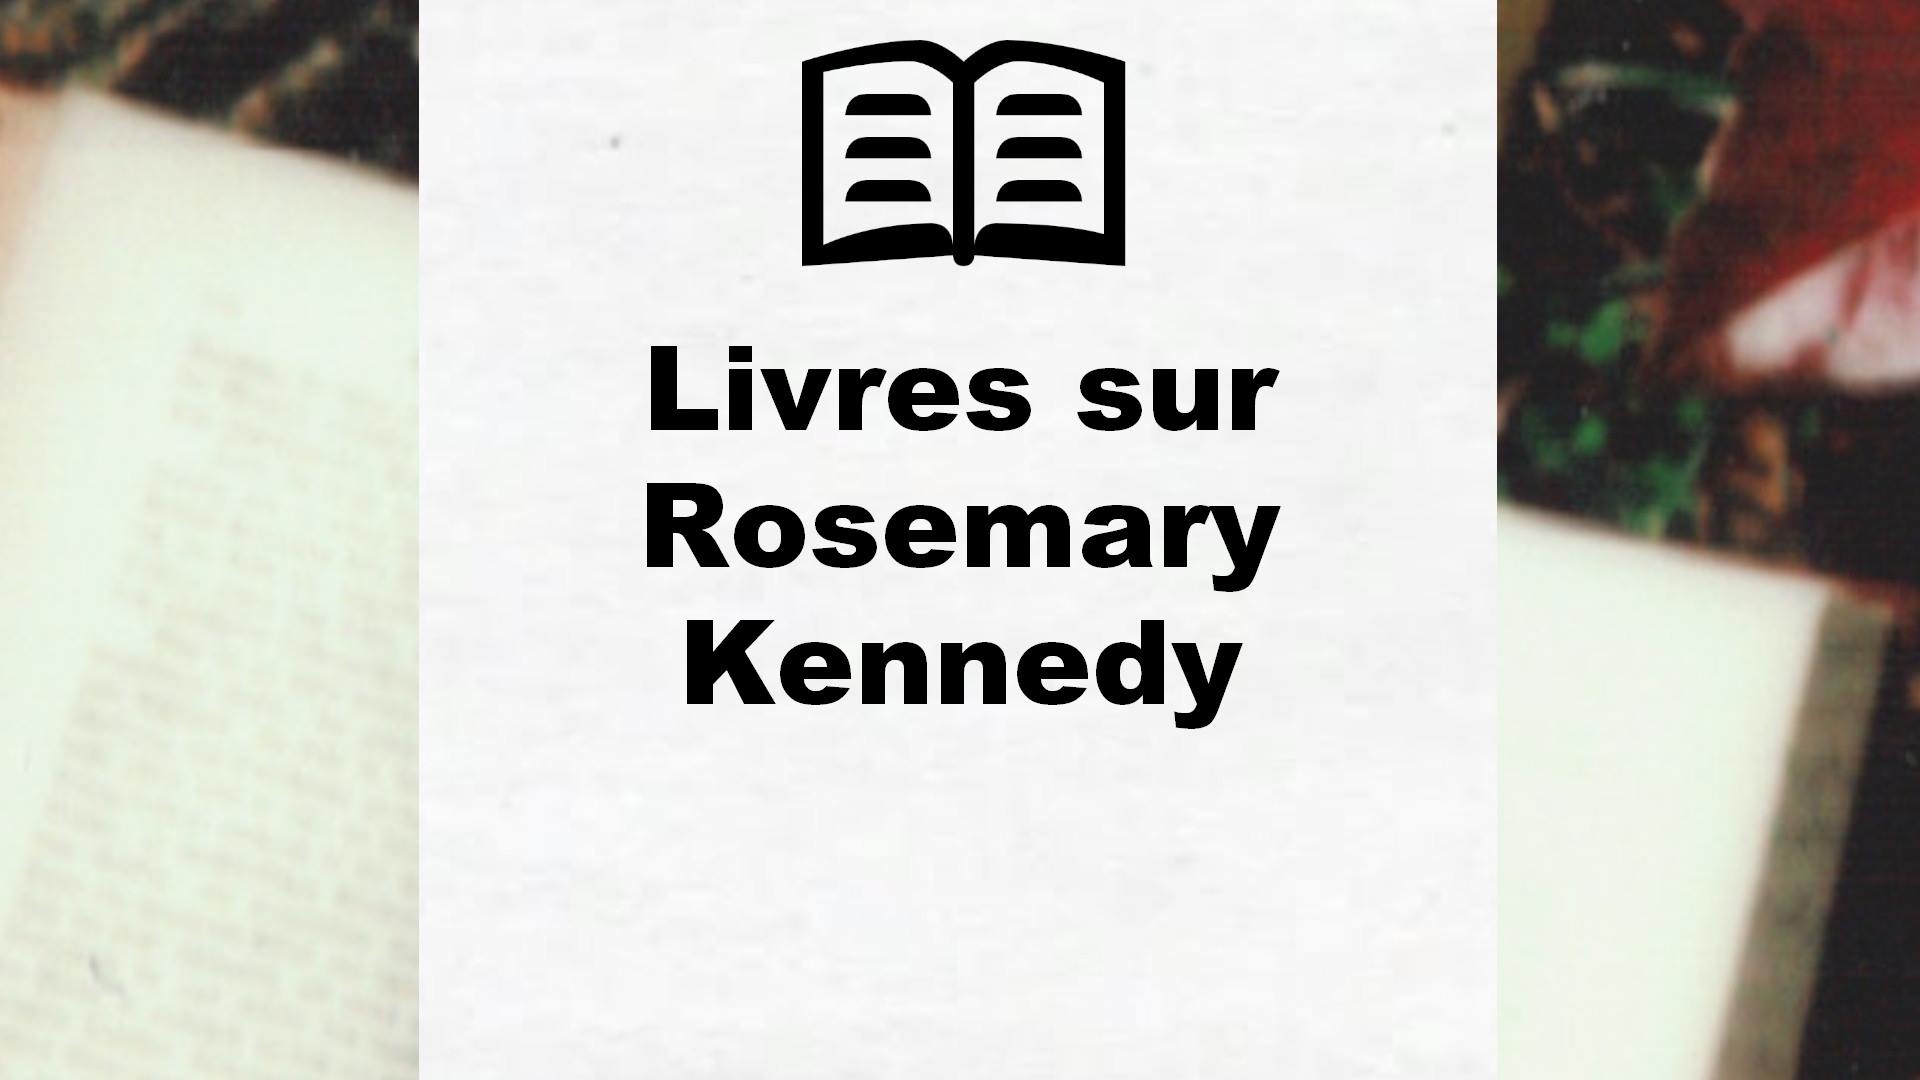 Livres sur Rosemary Kennedy